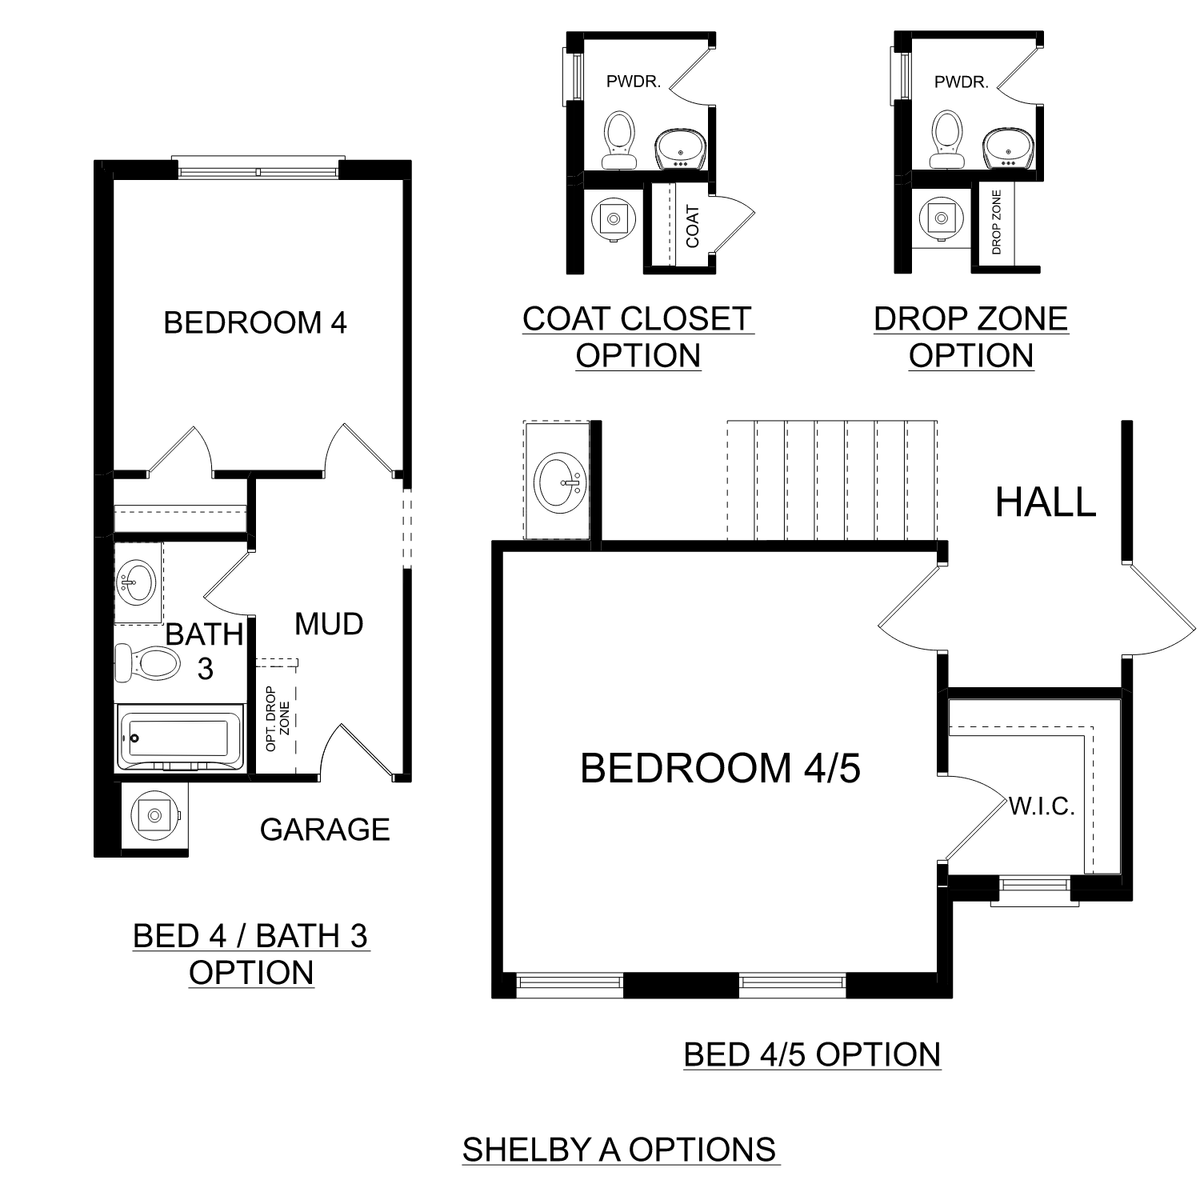 3 - The Shelby A buildable floor plan layout in Davidson Homes' Flint Meadows community.